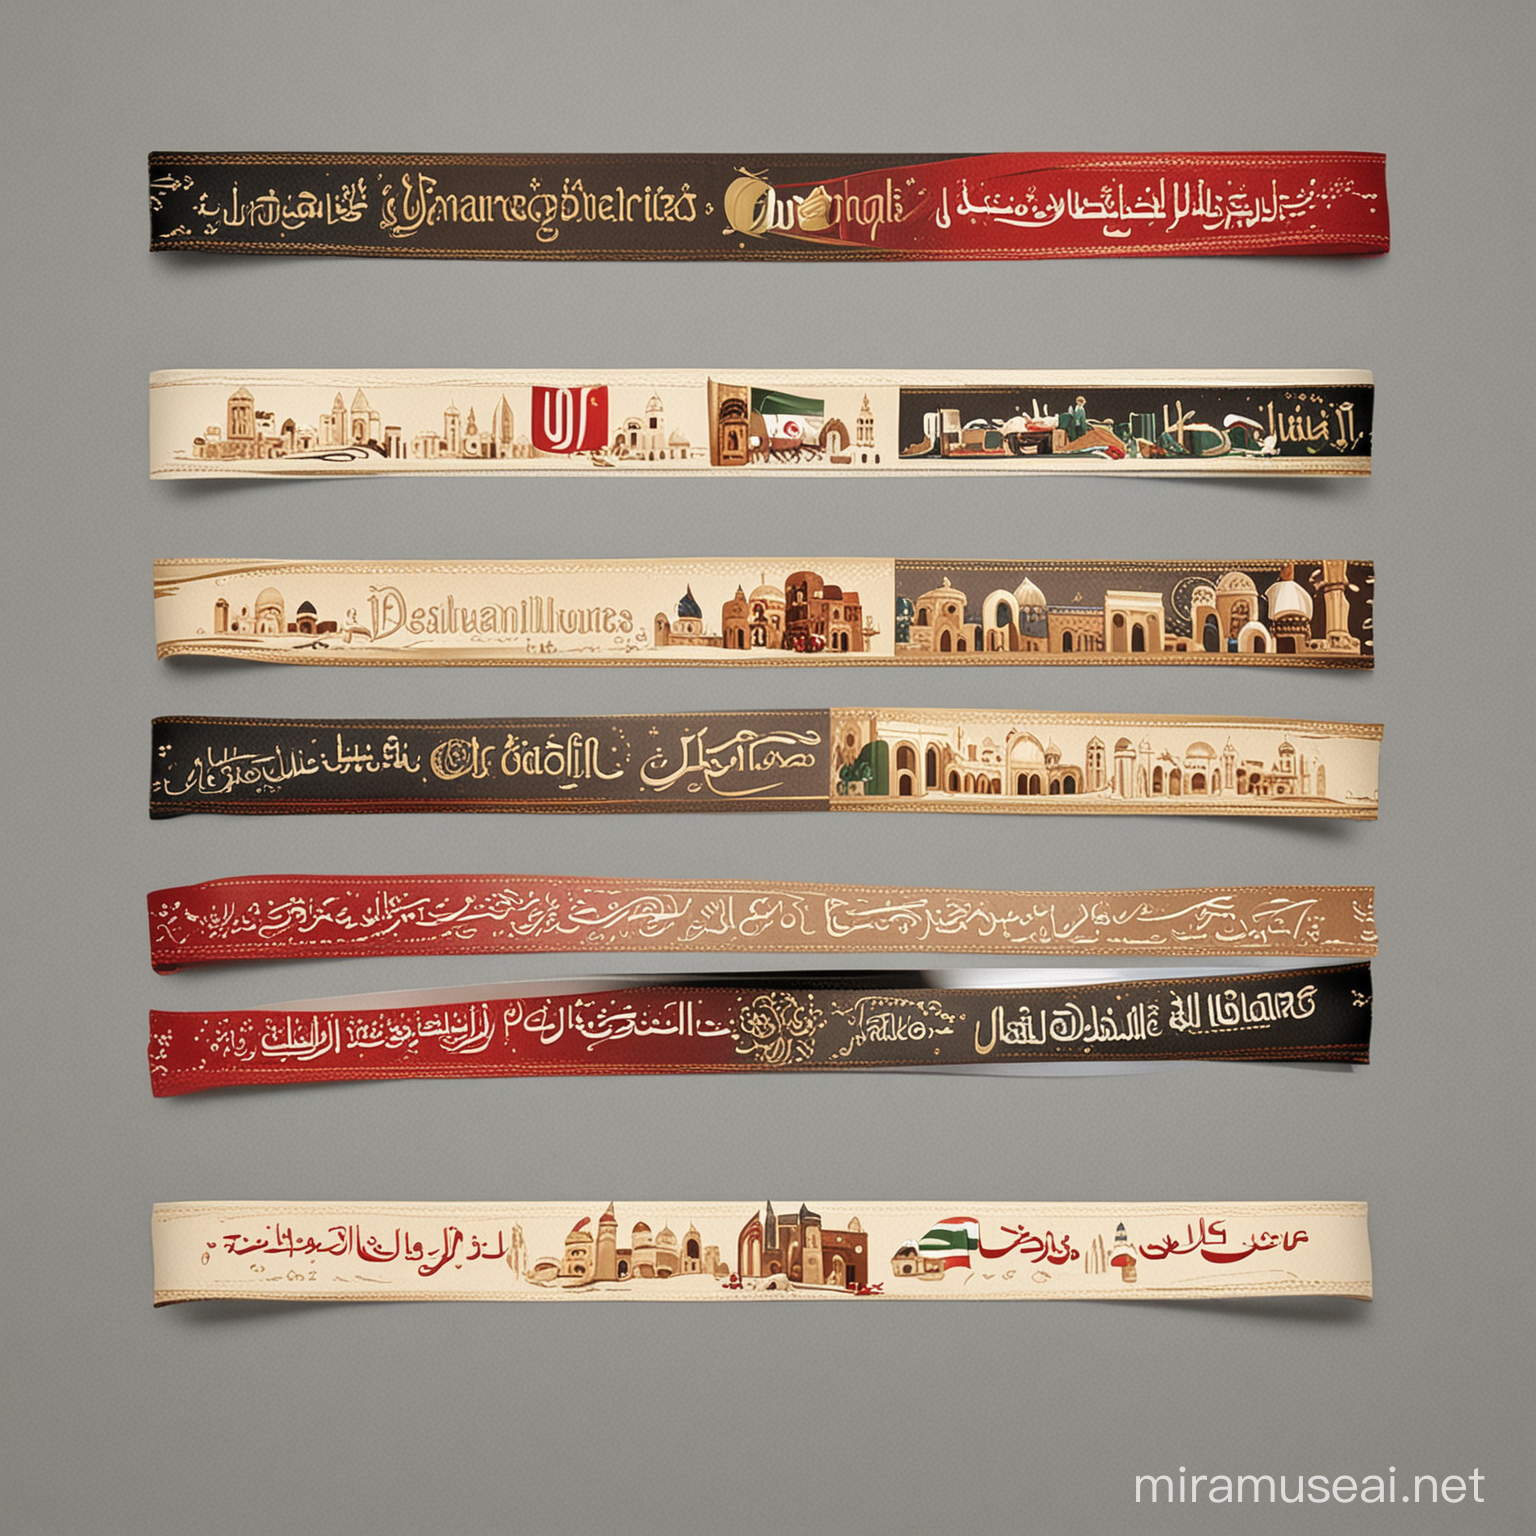 Ribbon for website decoration, Dubai/Emirates style As a surround of pictures